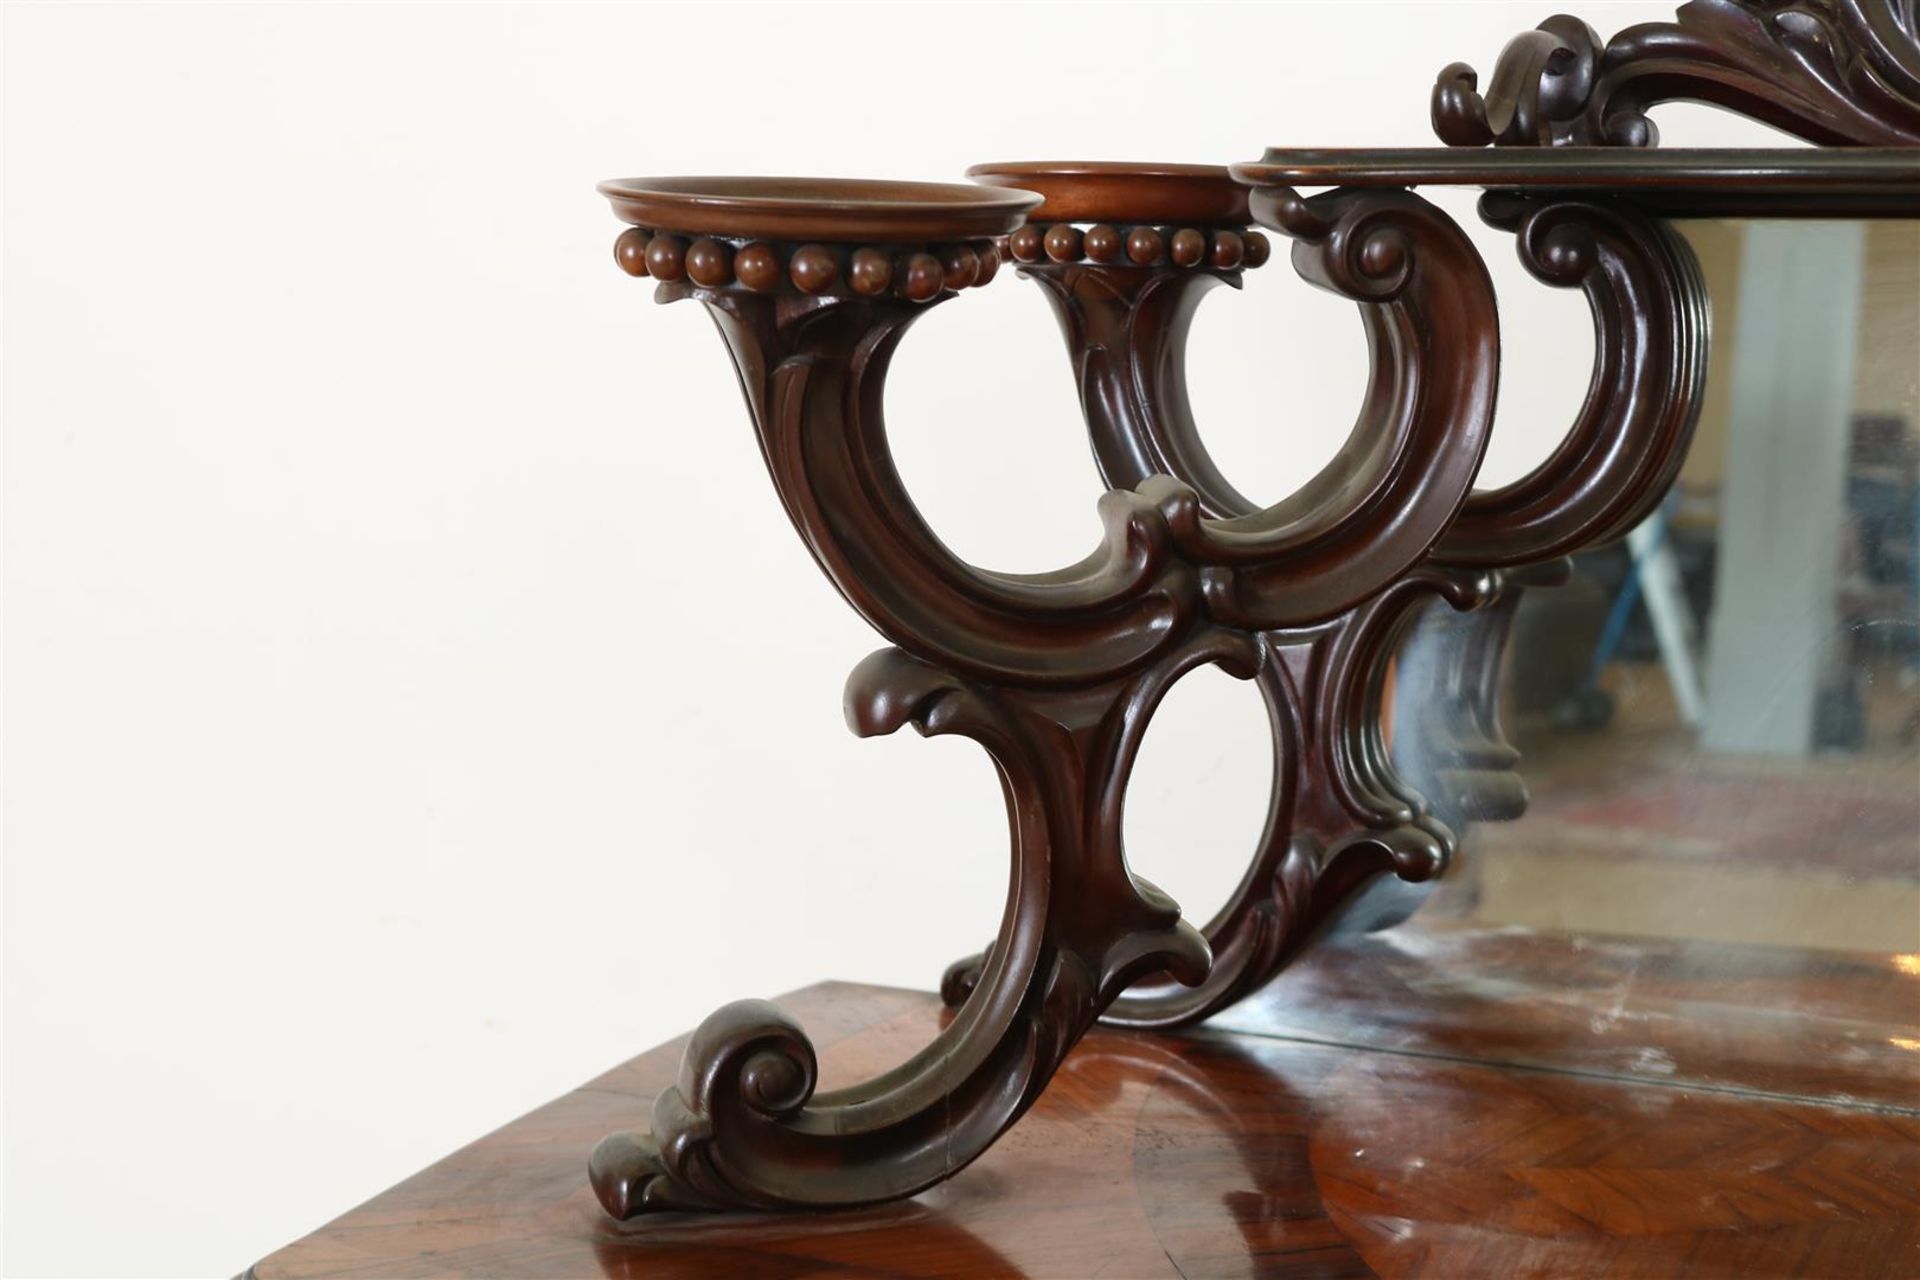 Mahogany Willem III open bonheur with mirror upstand flanked by 4 inserted holders, 3 drawers and - Image 3 of 8